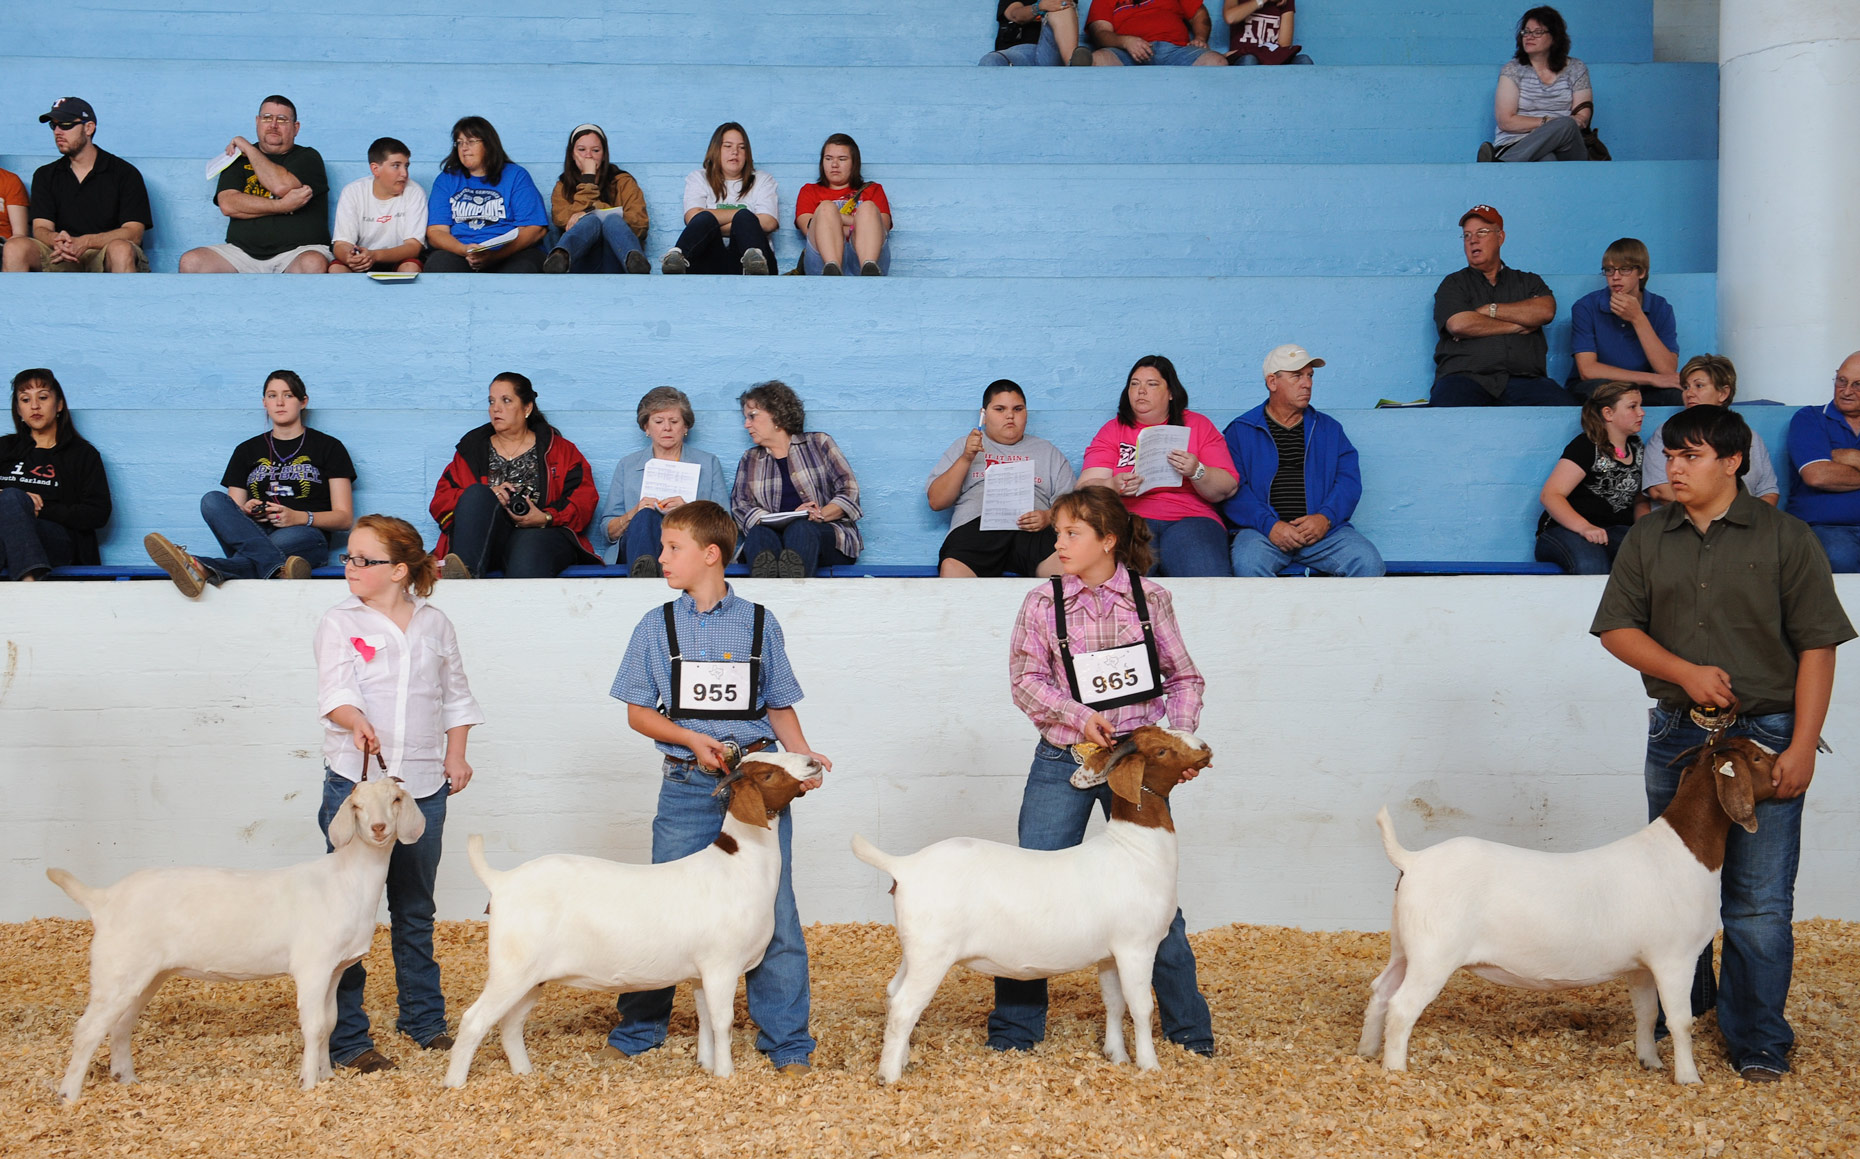 Goat show at The State Fair of Texas. Photography by Kevin Brown